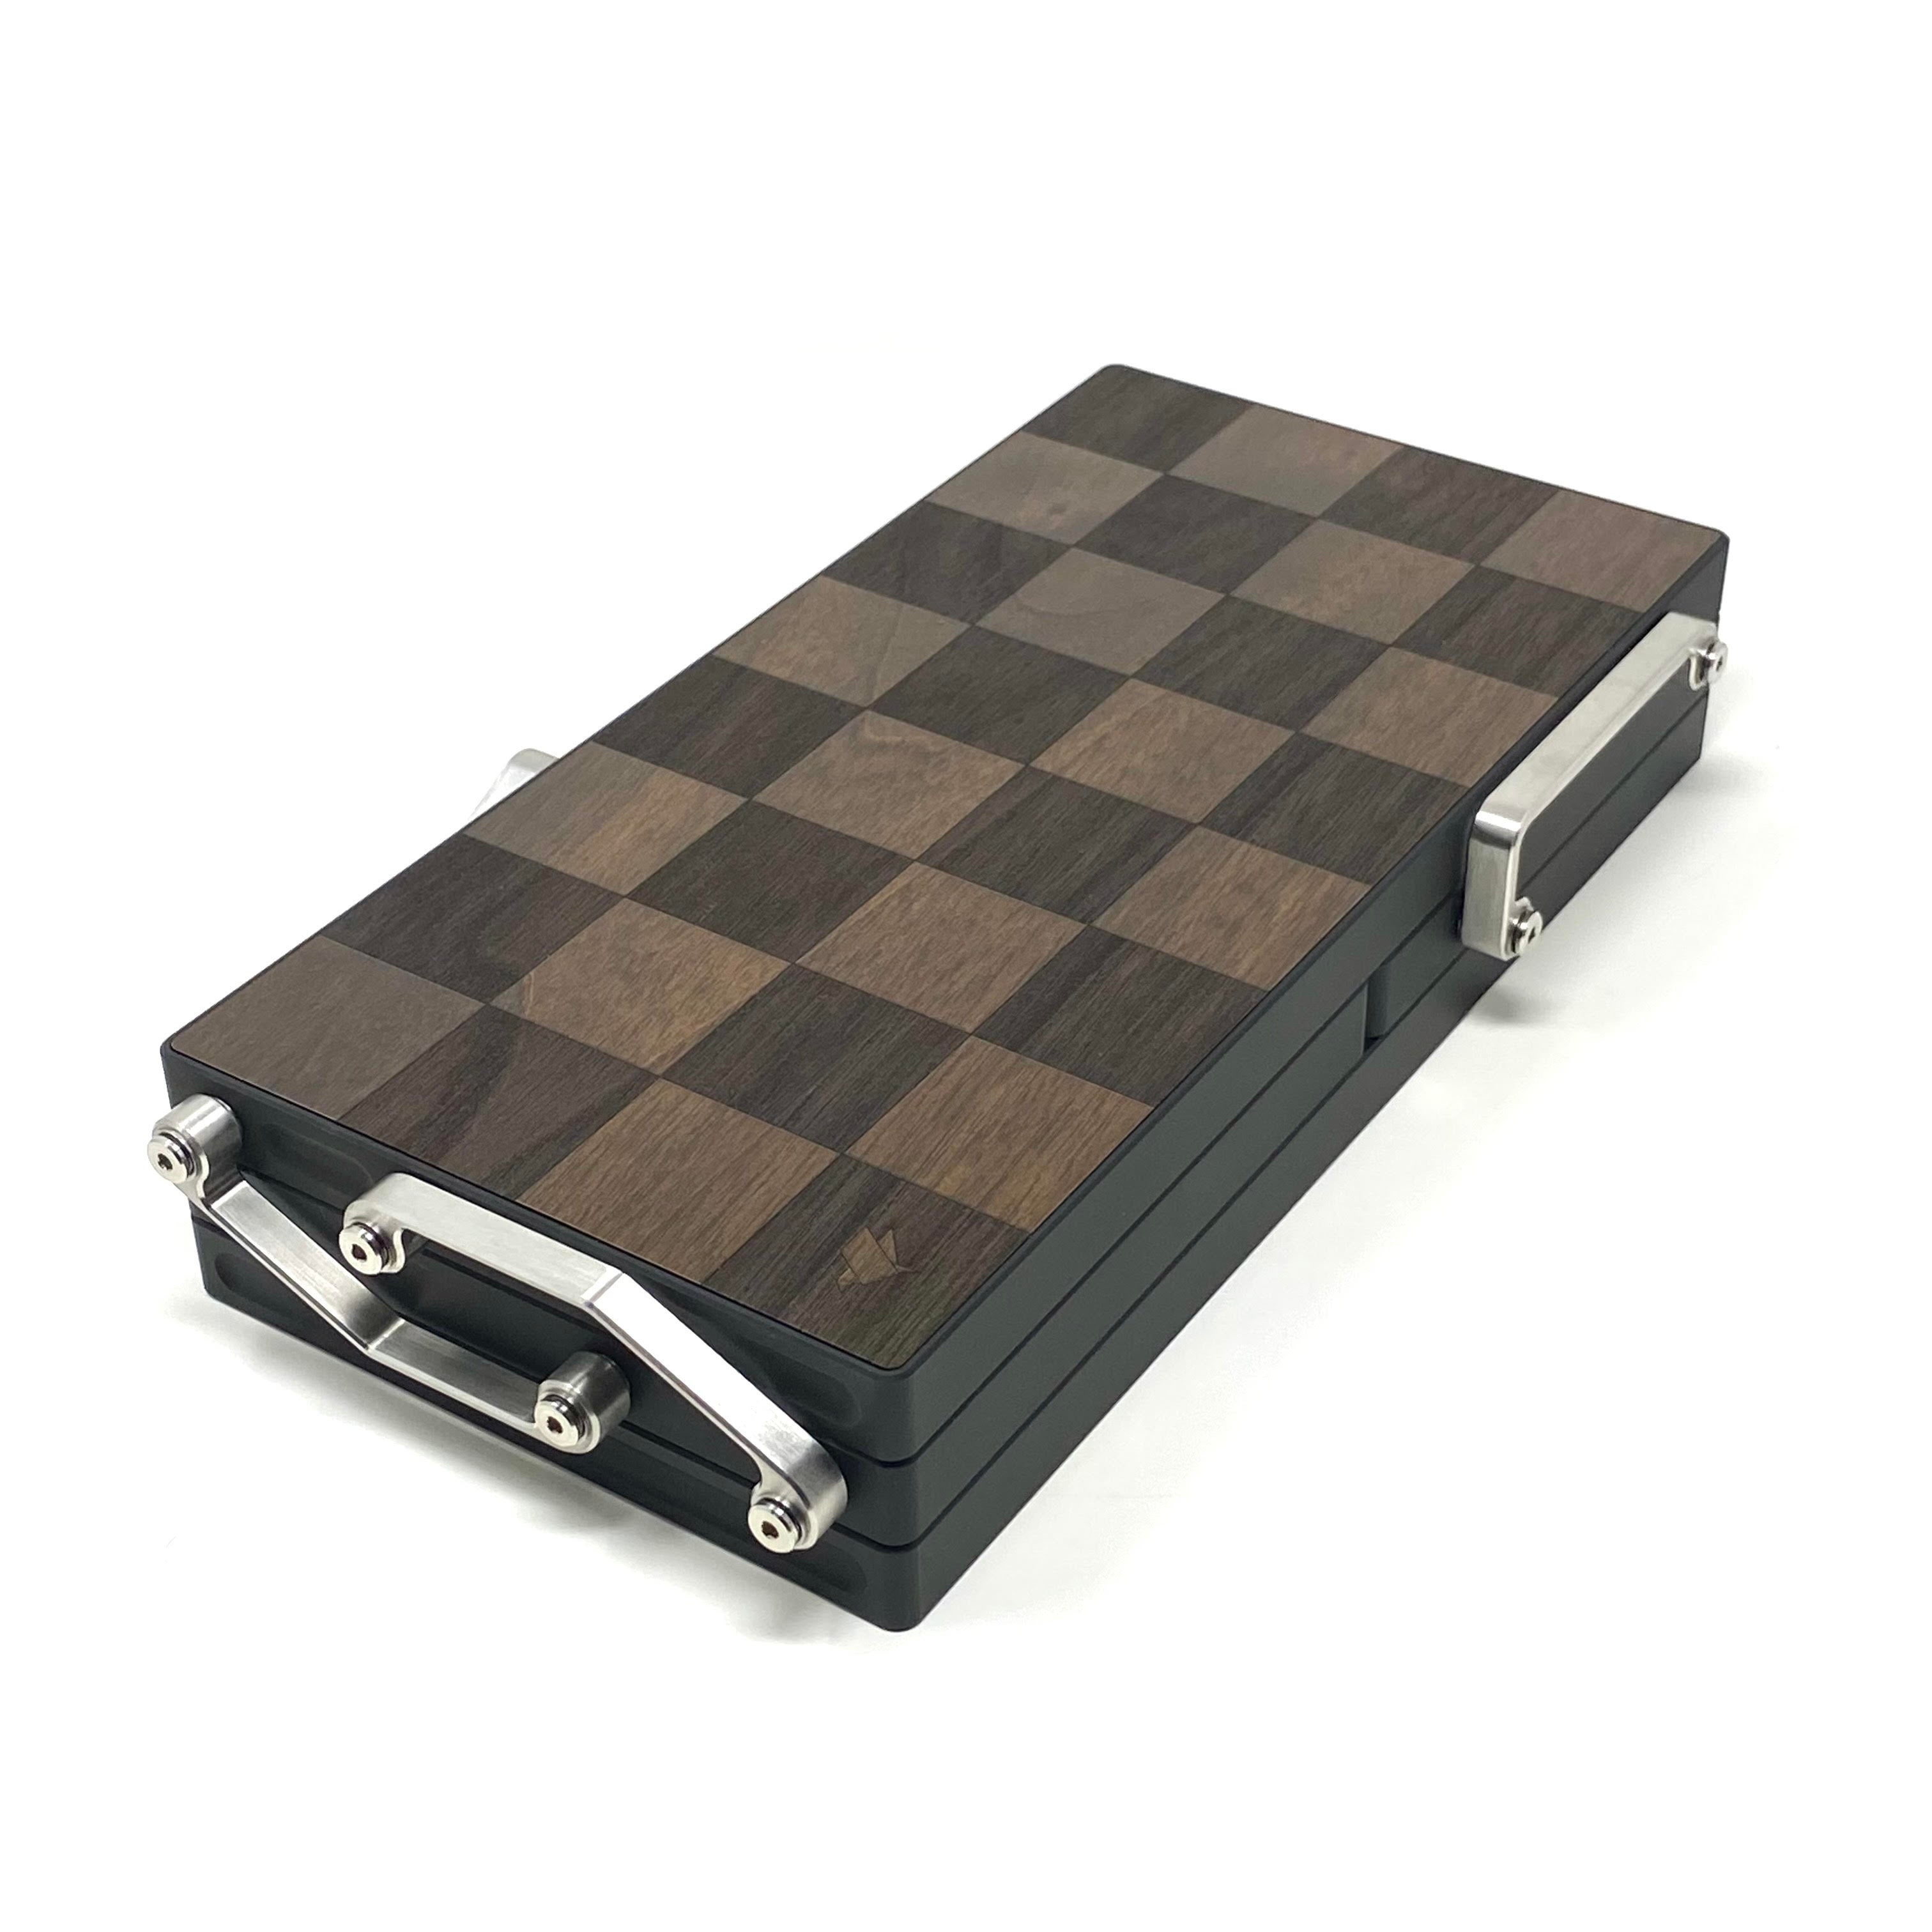 Kinetic Chess Set - First Limited Edition